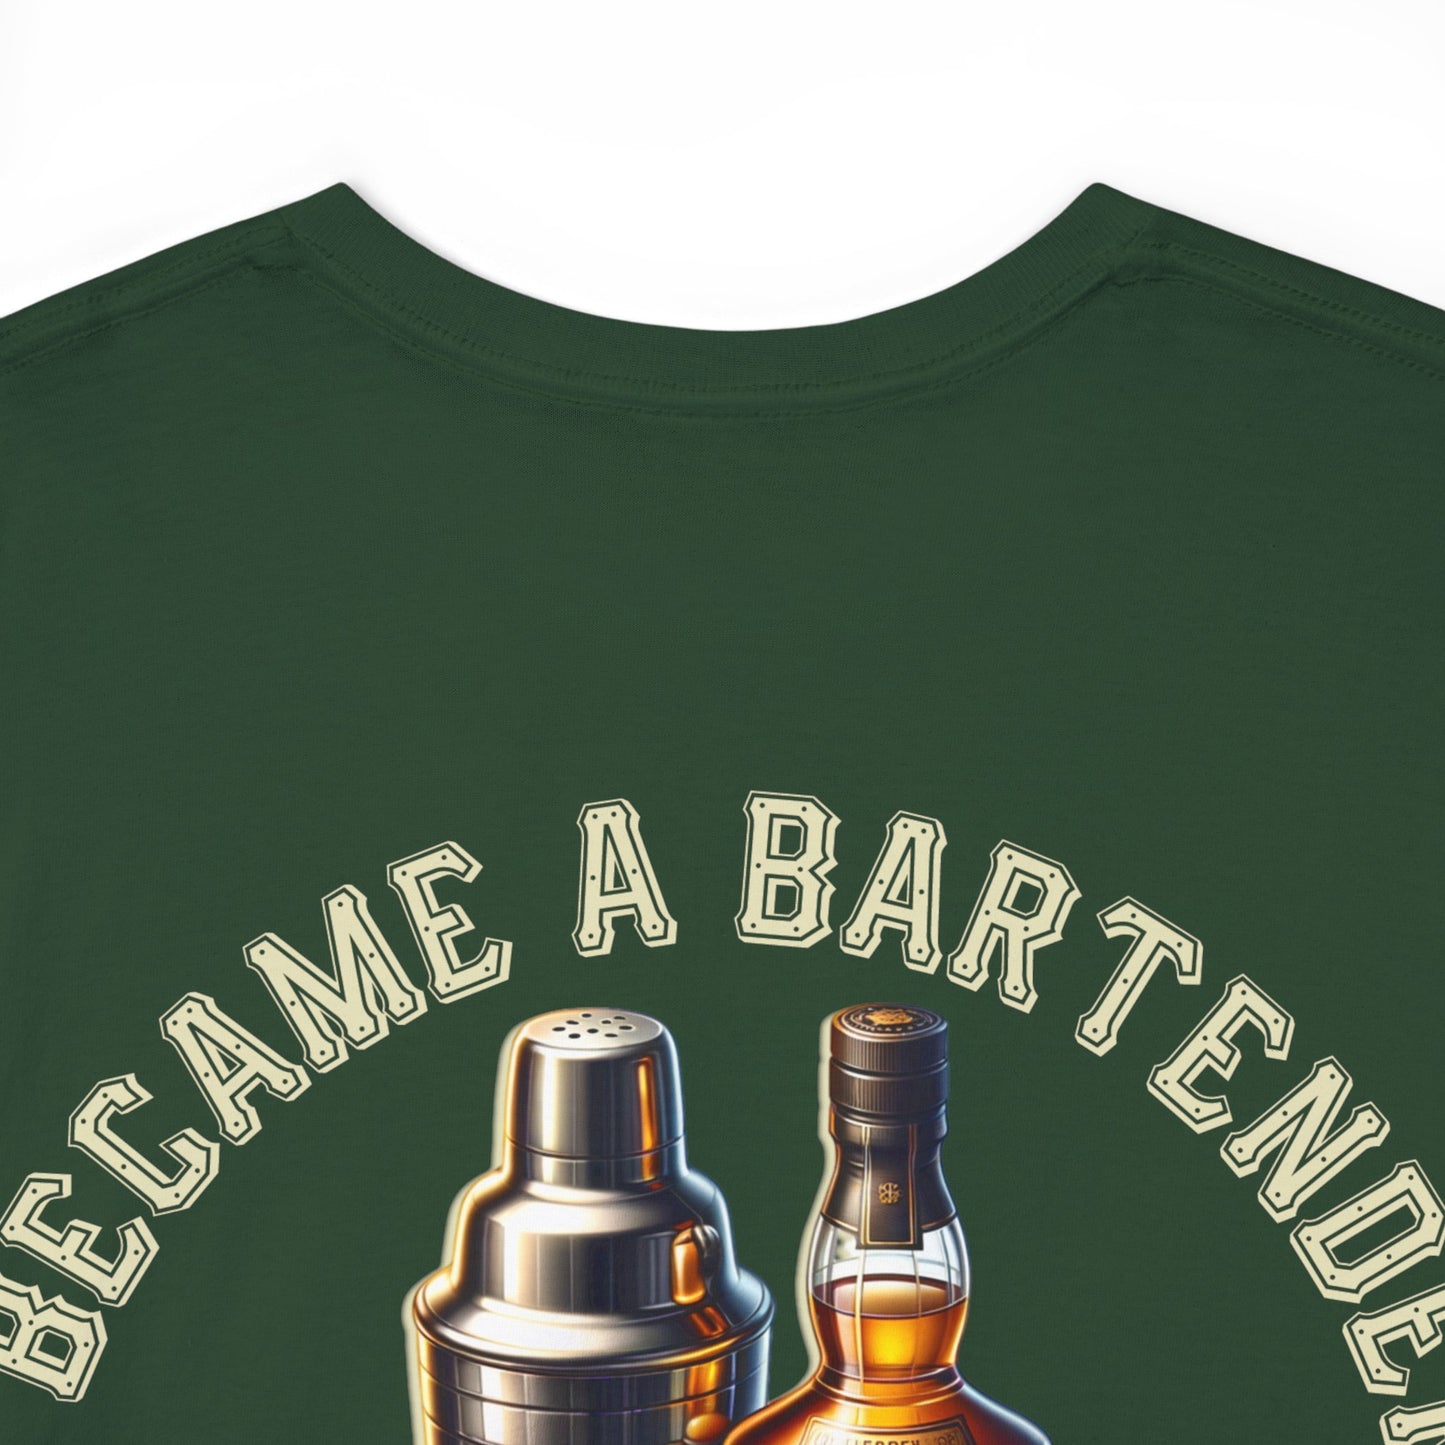 BARTENDER FAME AND MONEYON BACK  Unisex Heavy Cotton Tee